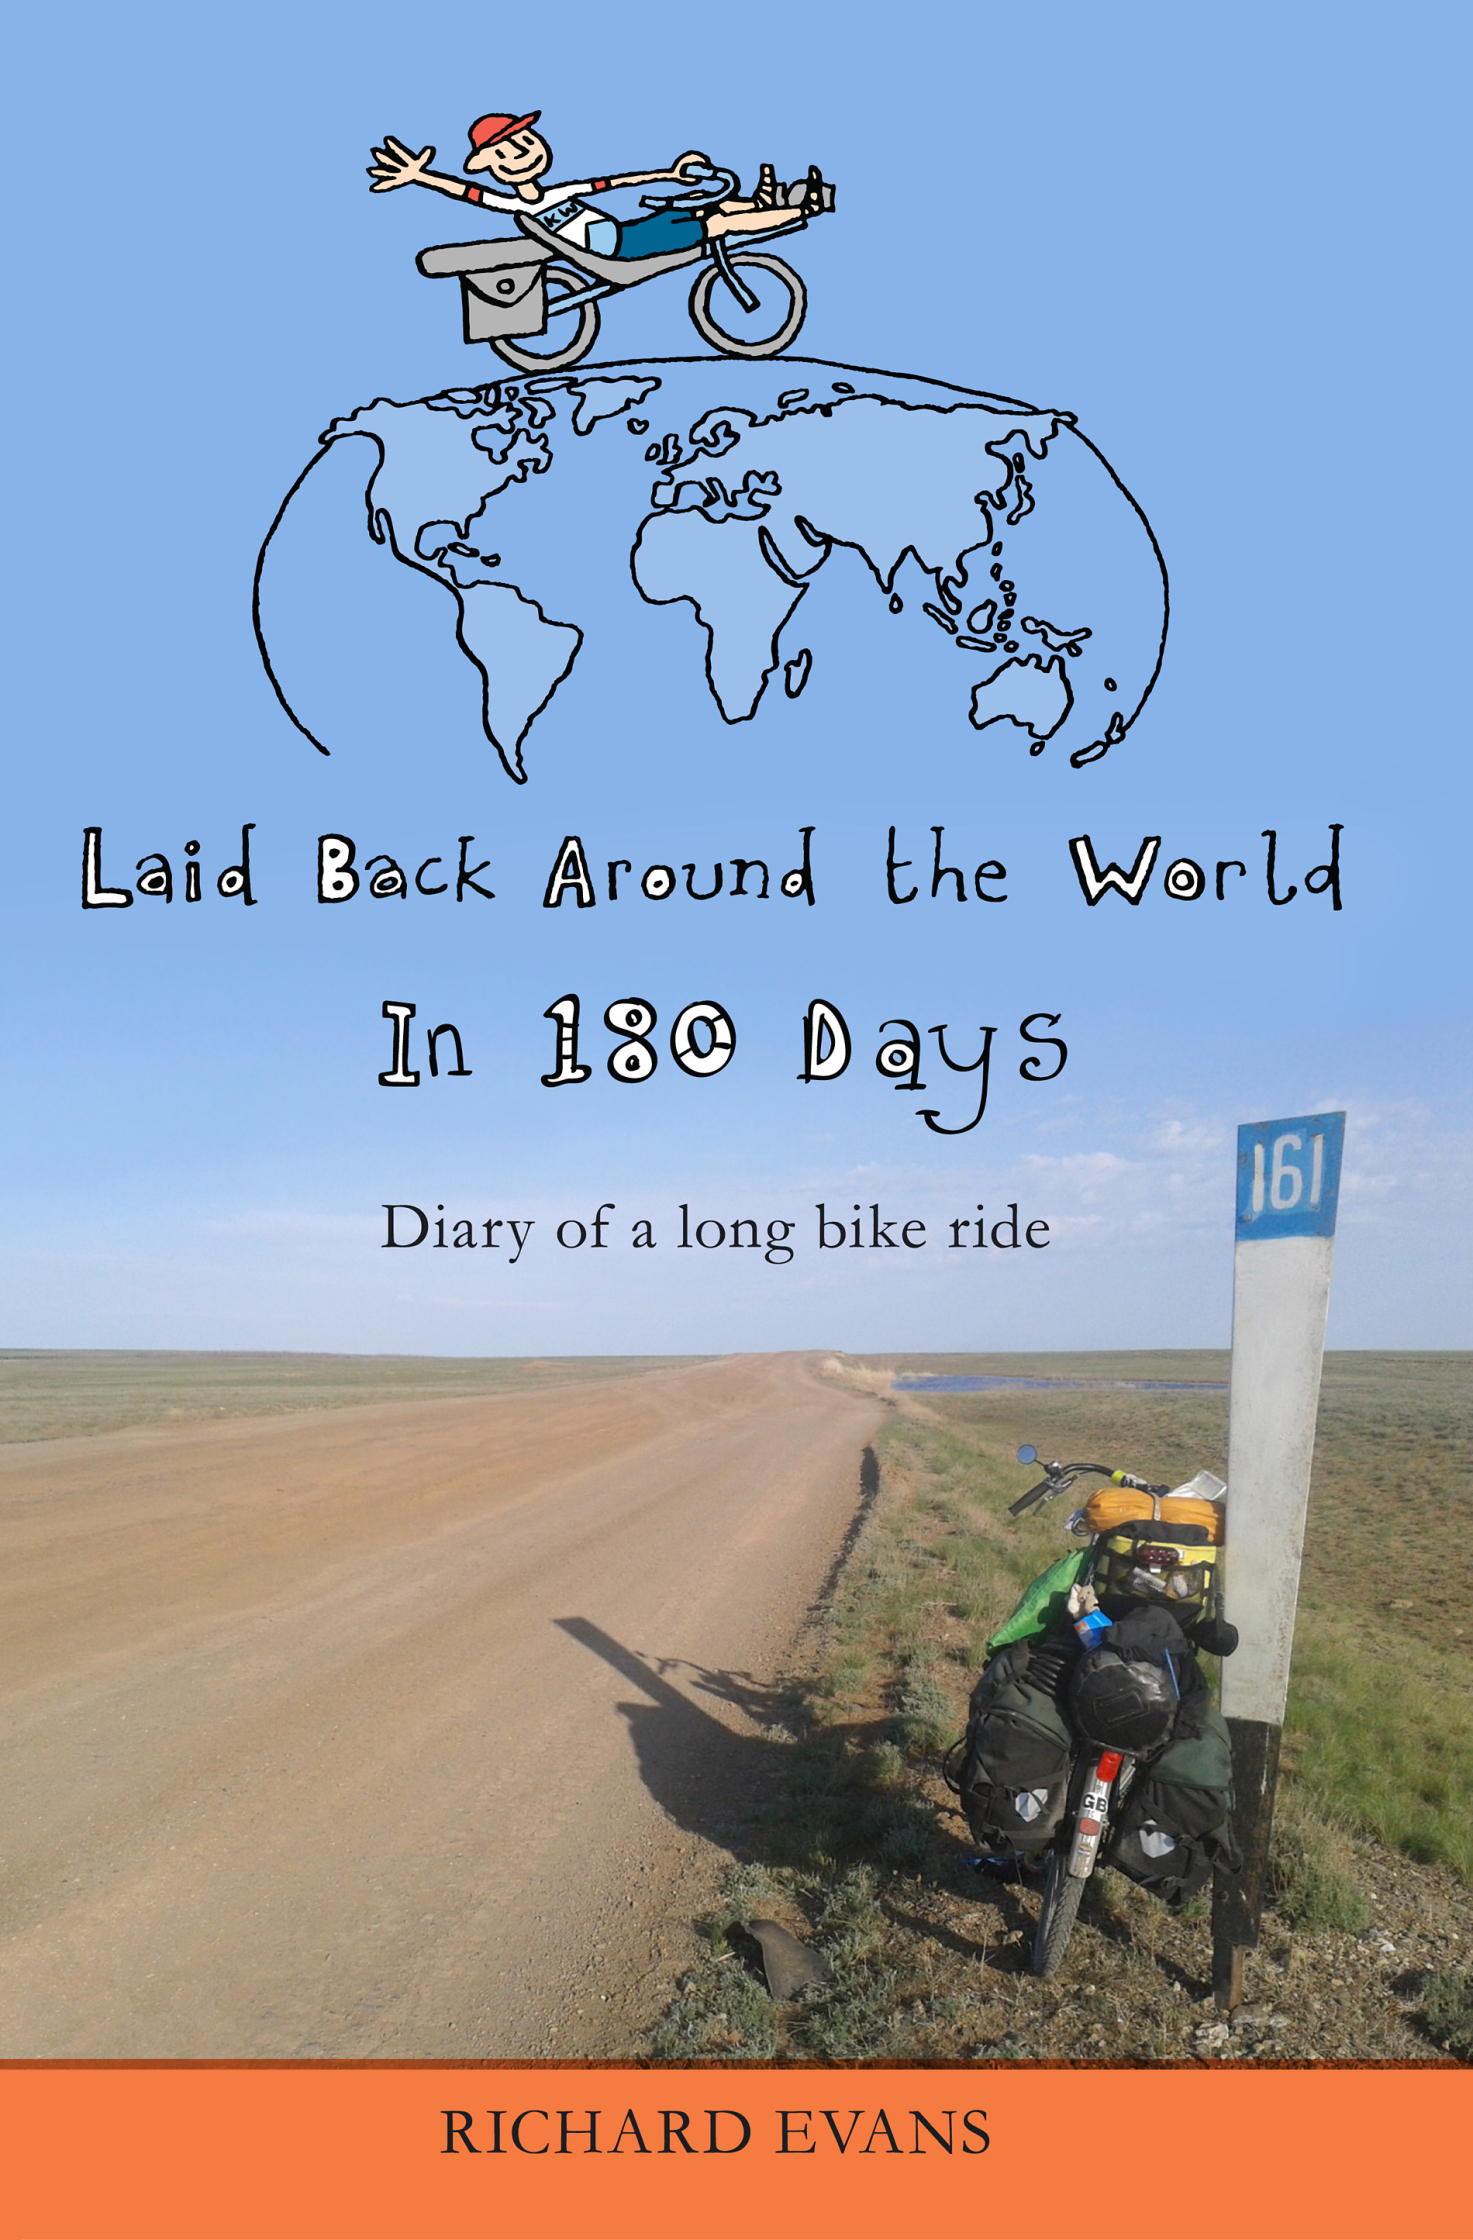 Laid Back Around the World Book Cover.jpg